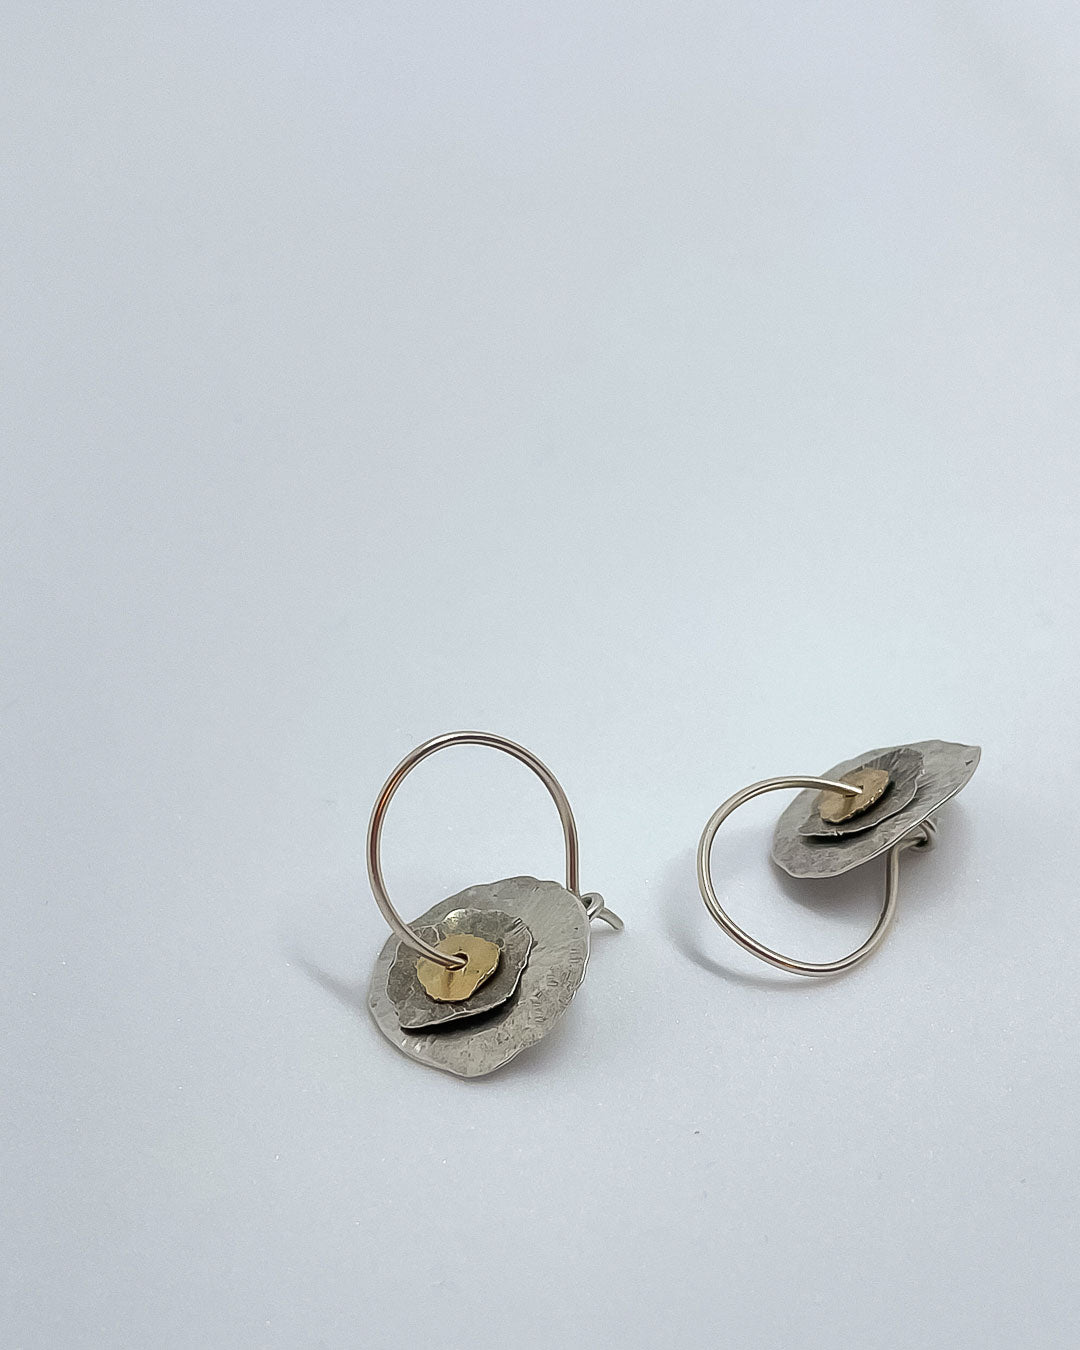 Multi layered Silver and 9ct Gold hand fabricated Hoop earrings lying on a surface